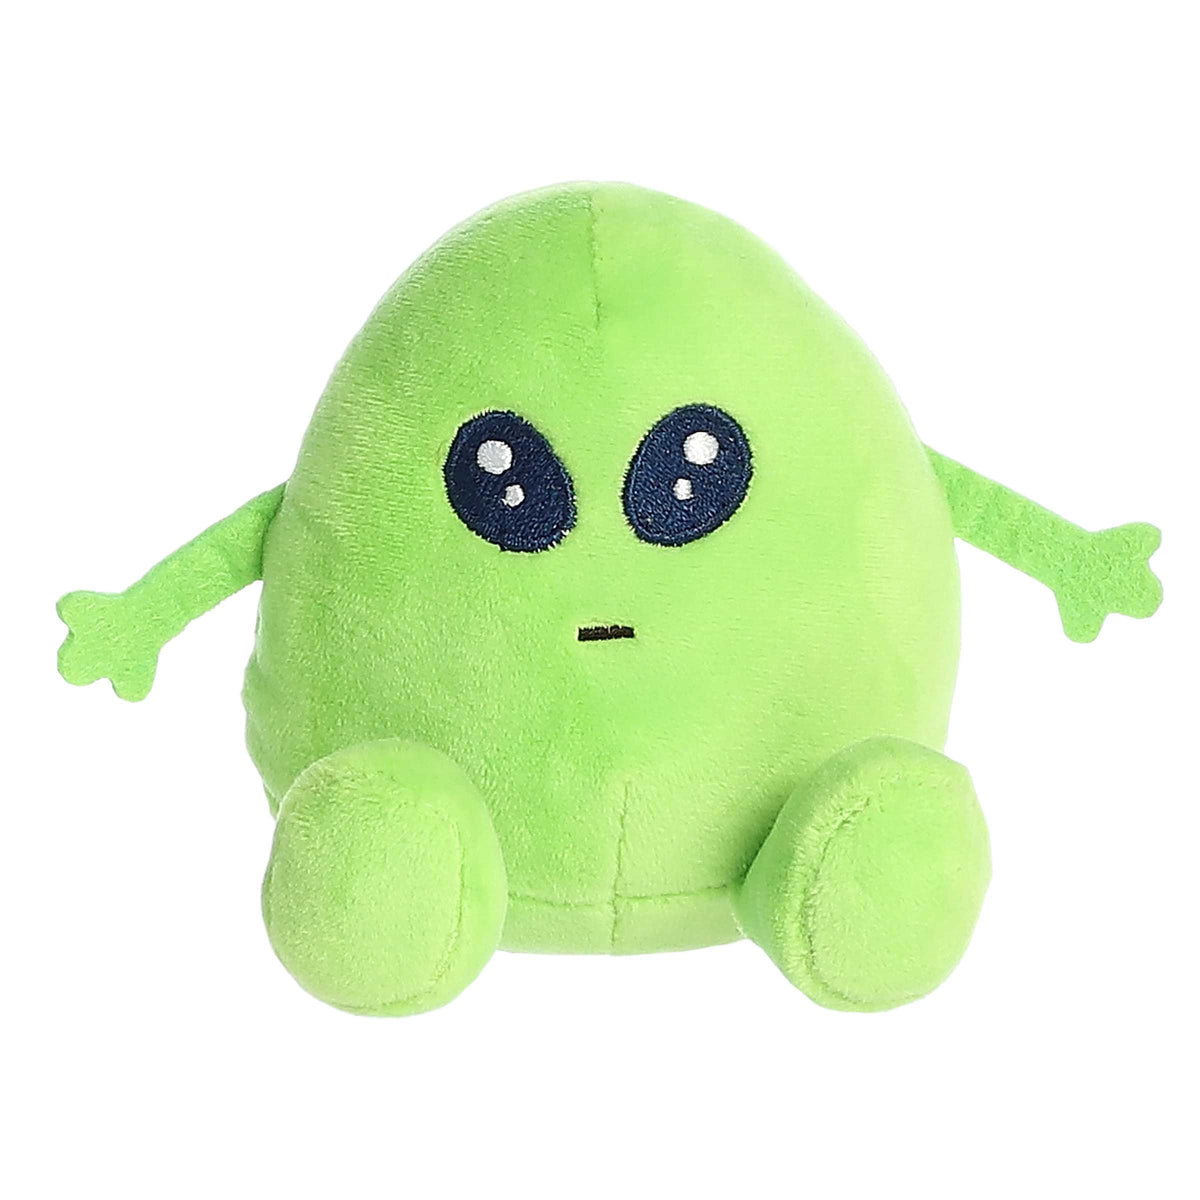 Quirky egg plush toy with a lime green body, alien-like eyes, and an "Eggstra-terrestrial" expression written on its back